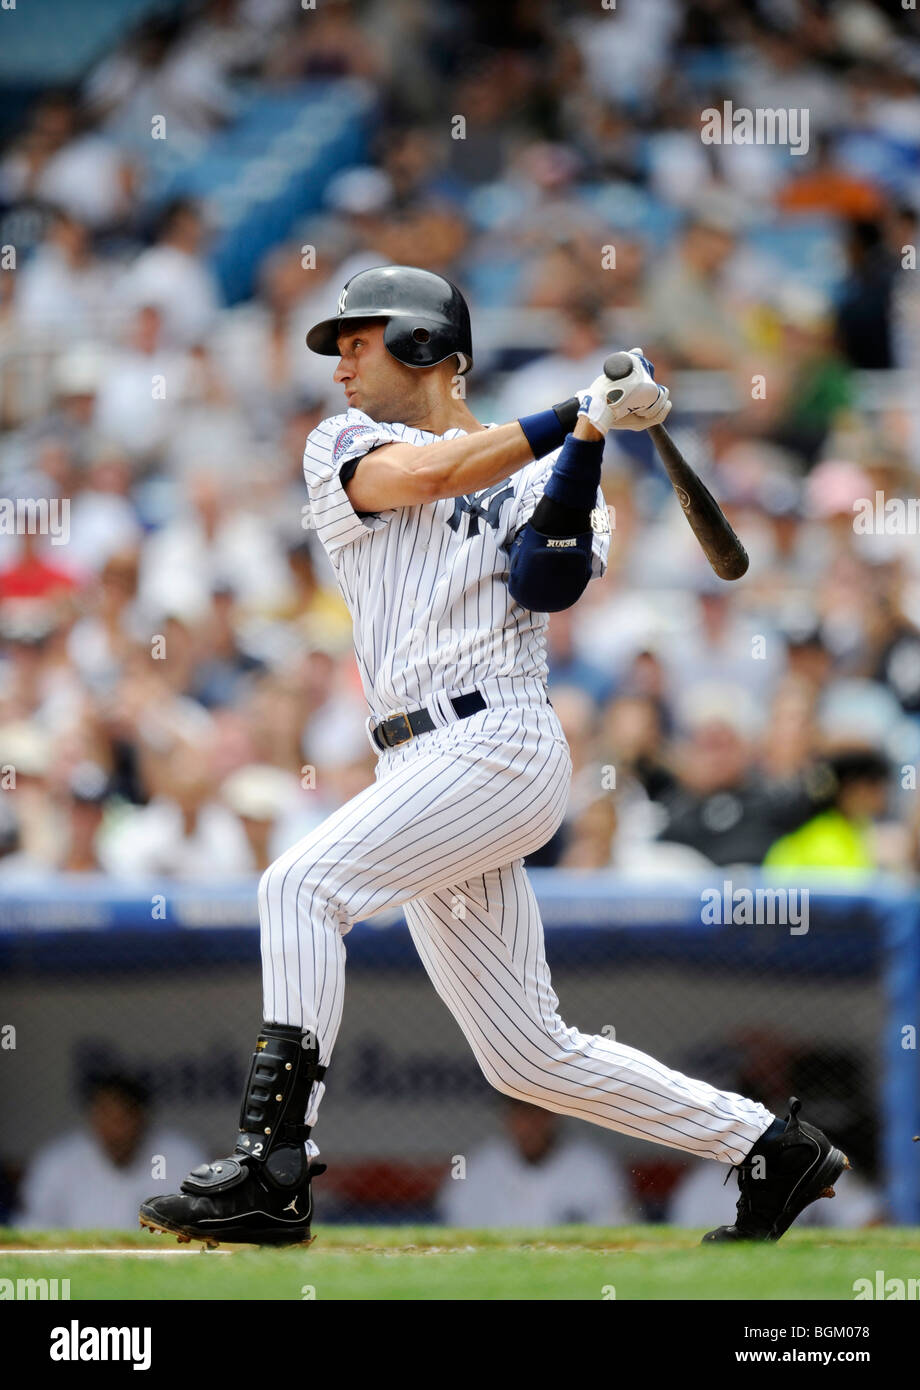 Derek Jeter #2 of the New York Yankees bats against the Tampa Bay Rays during their game at Yankee Stadium Stock Photo